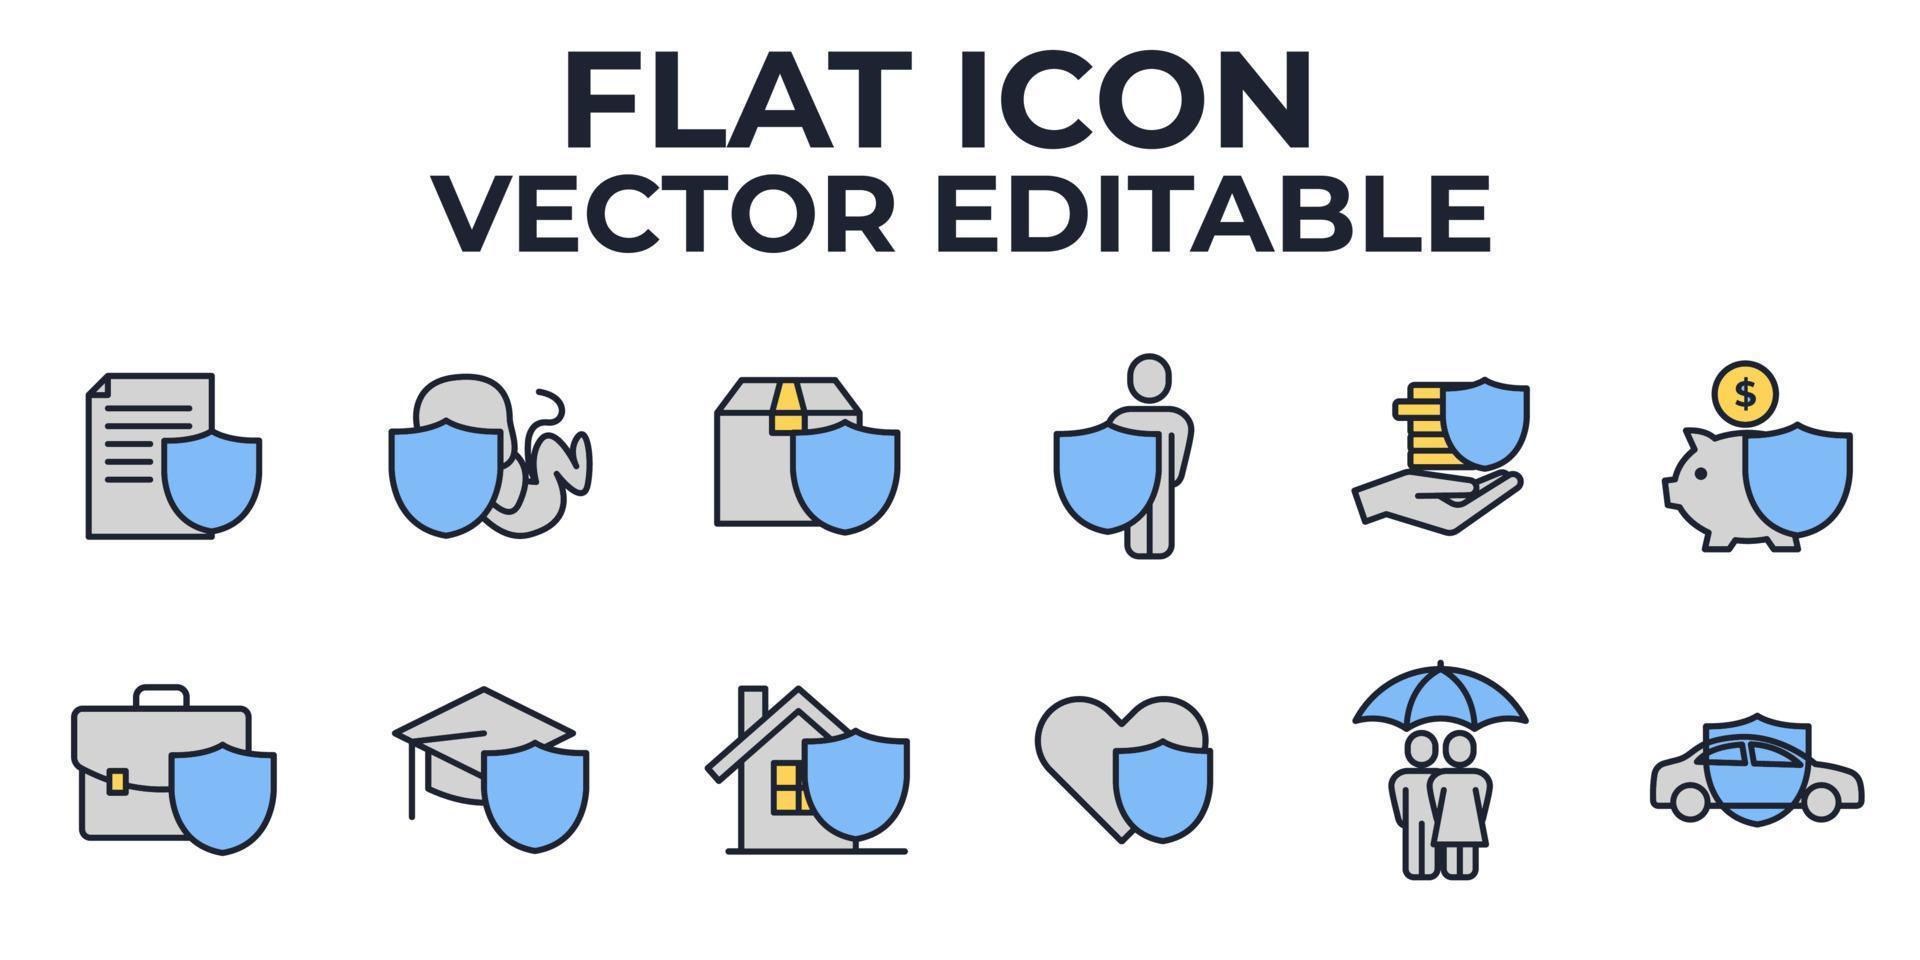 insurance set icon symbol template for graphic and web design collection logo vector illustration